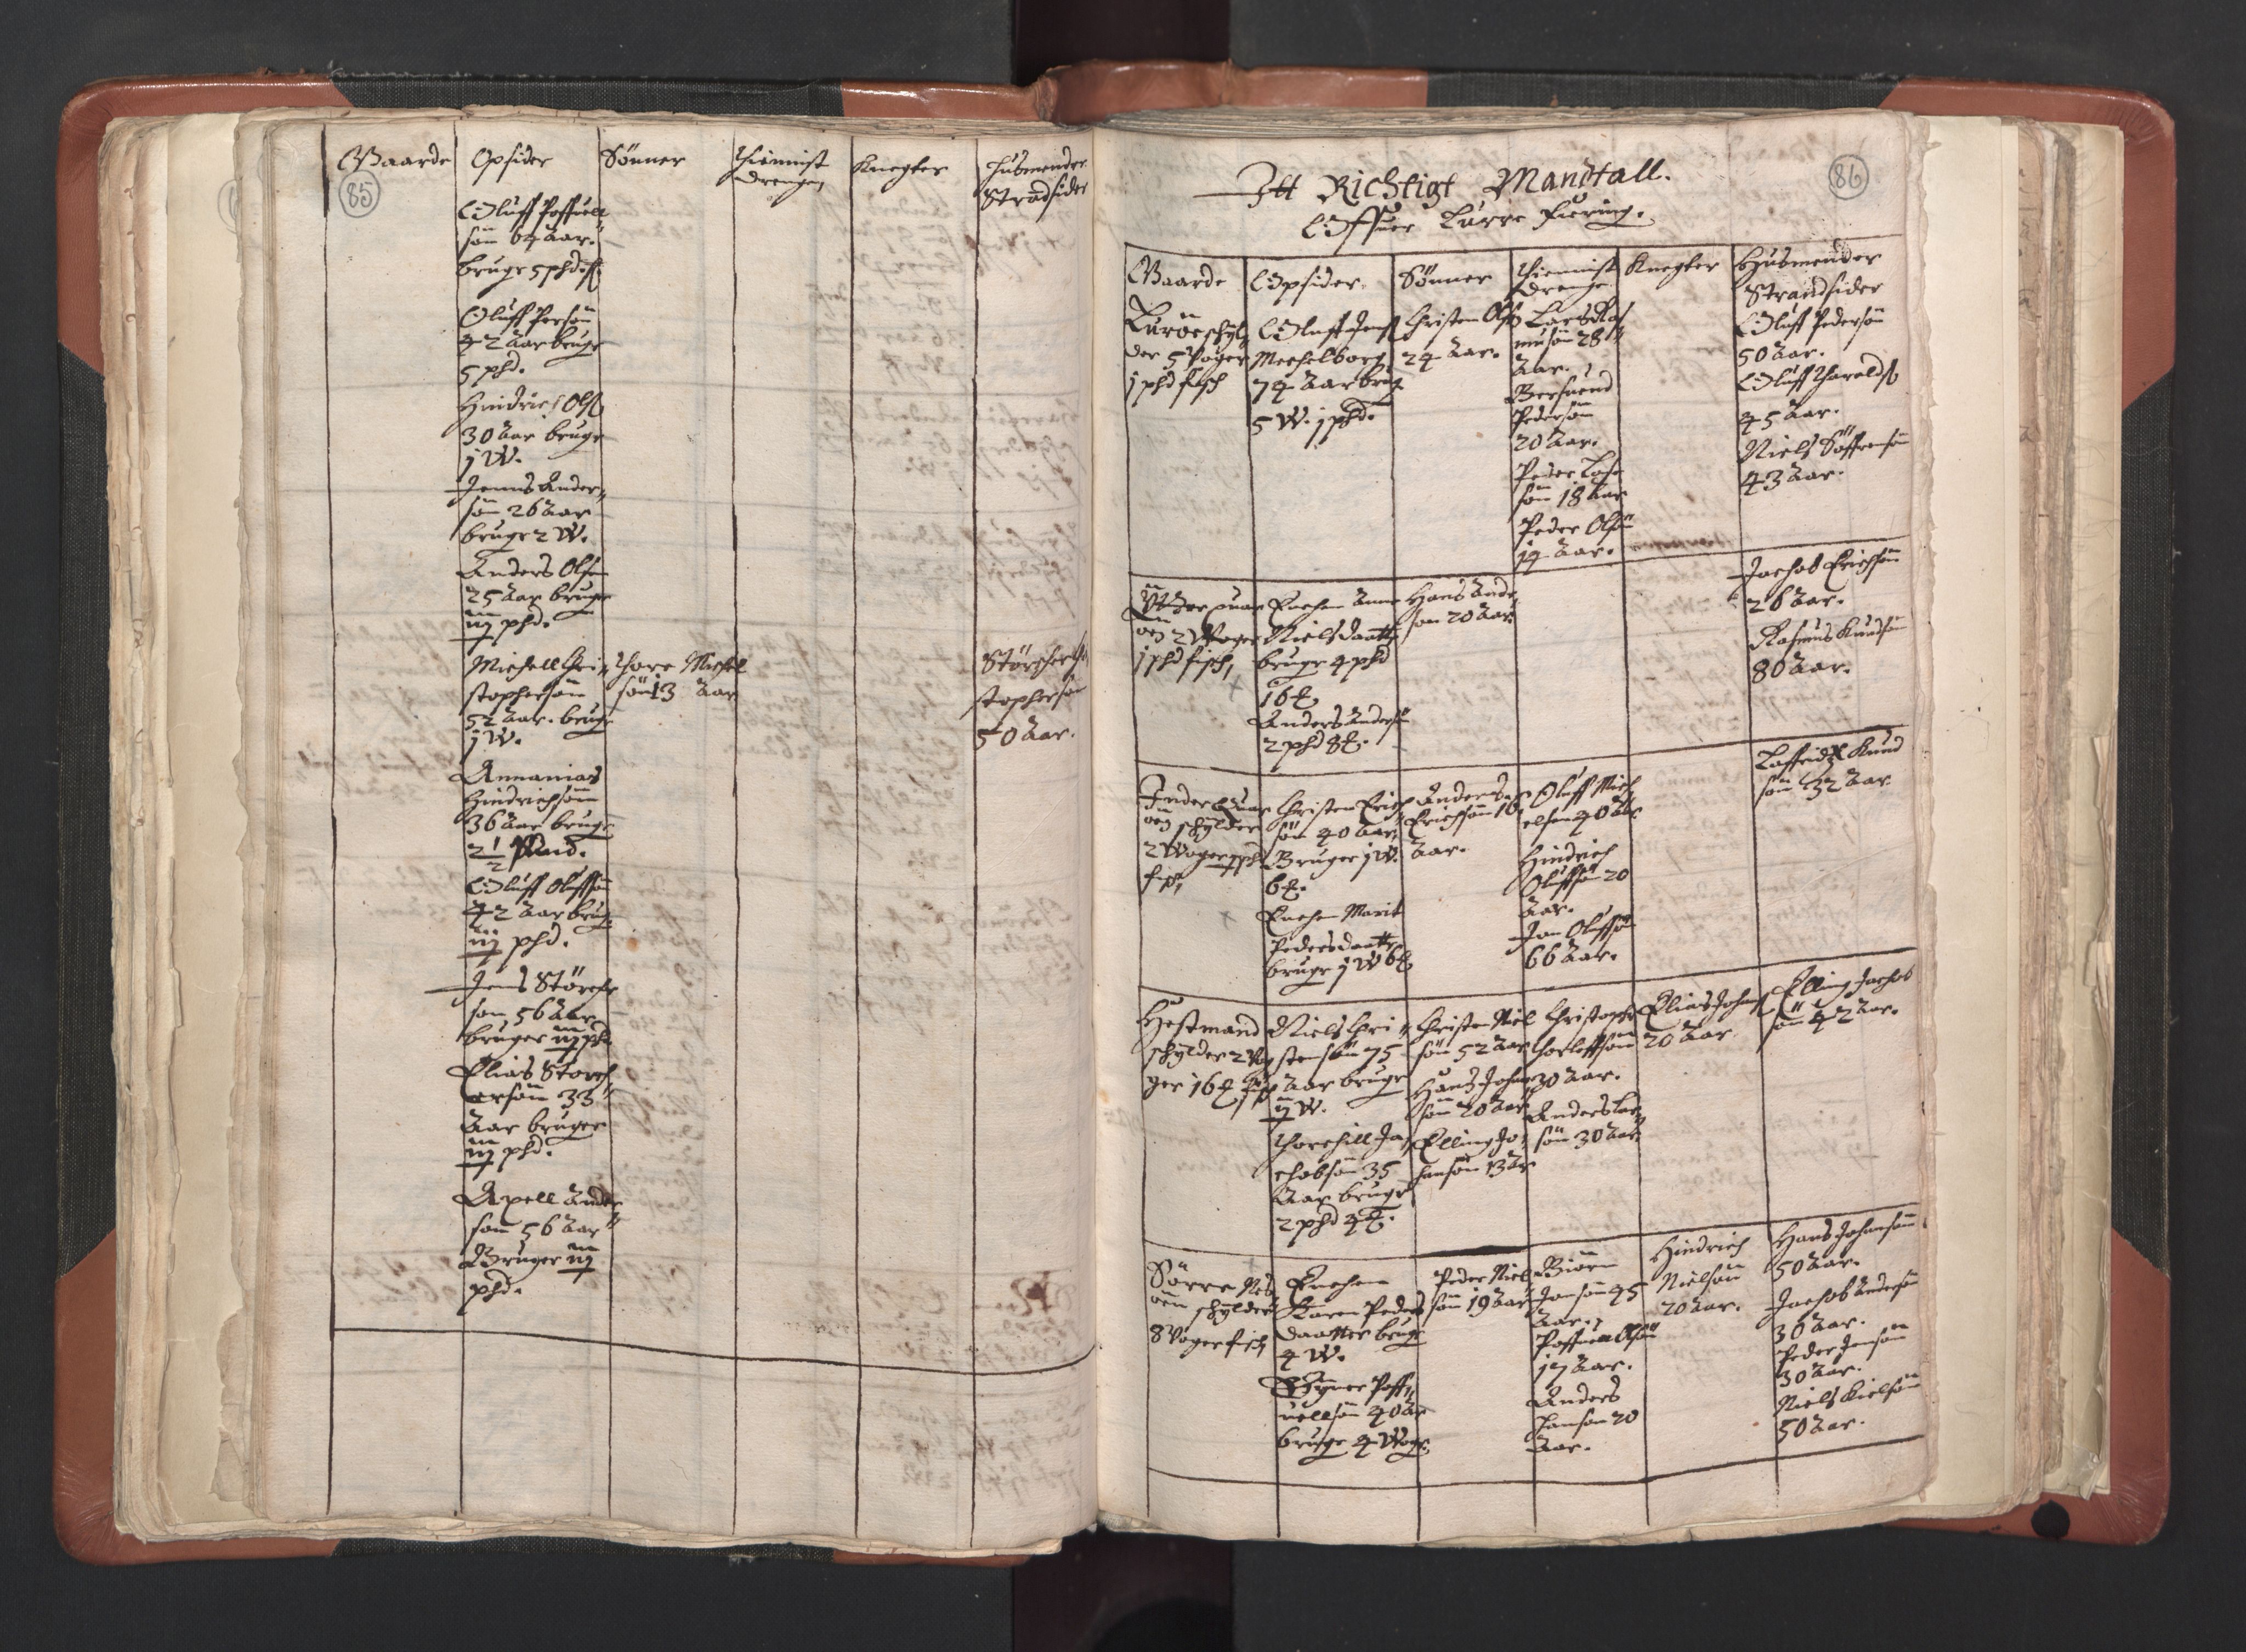 RA, Vicar's Census 1664-1666, no. 35: Helgeland deanery and Salten deanery, 1664-1666, p. 85-86